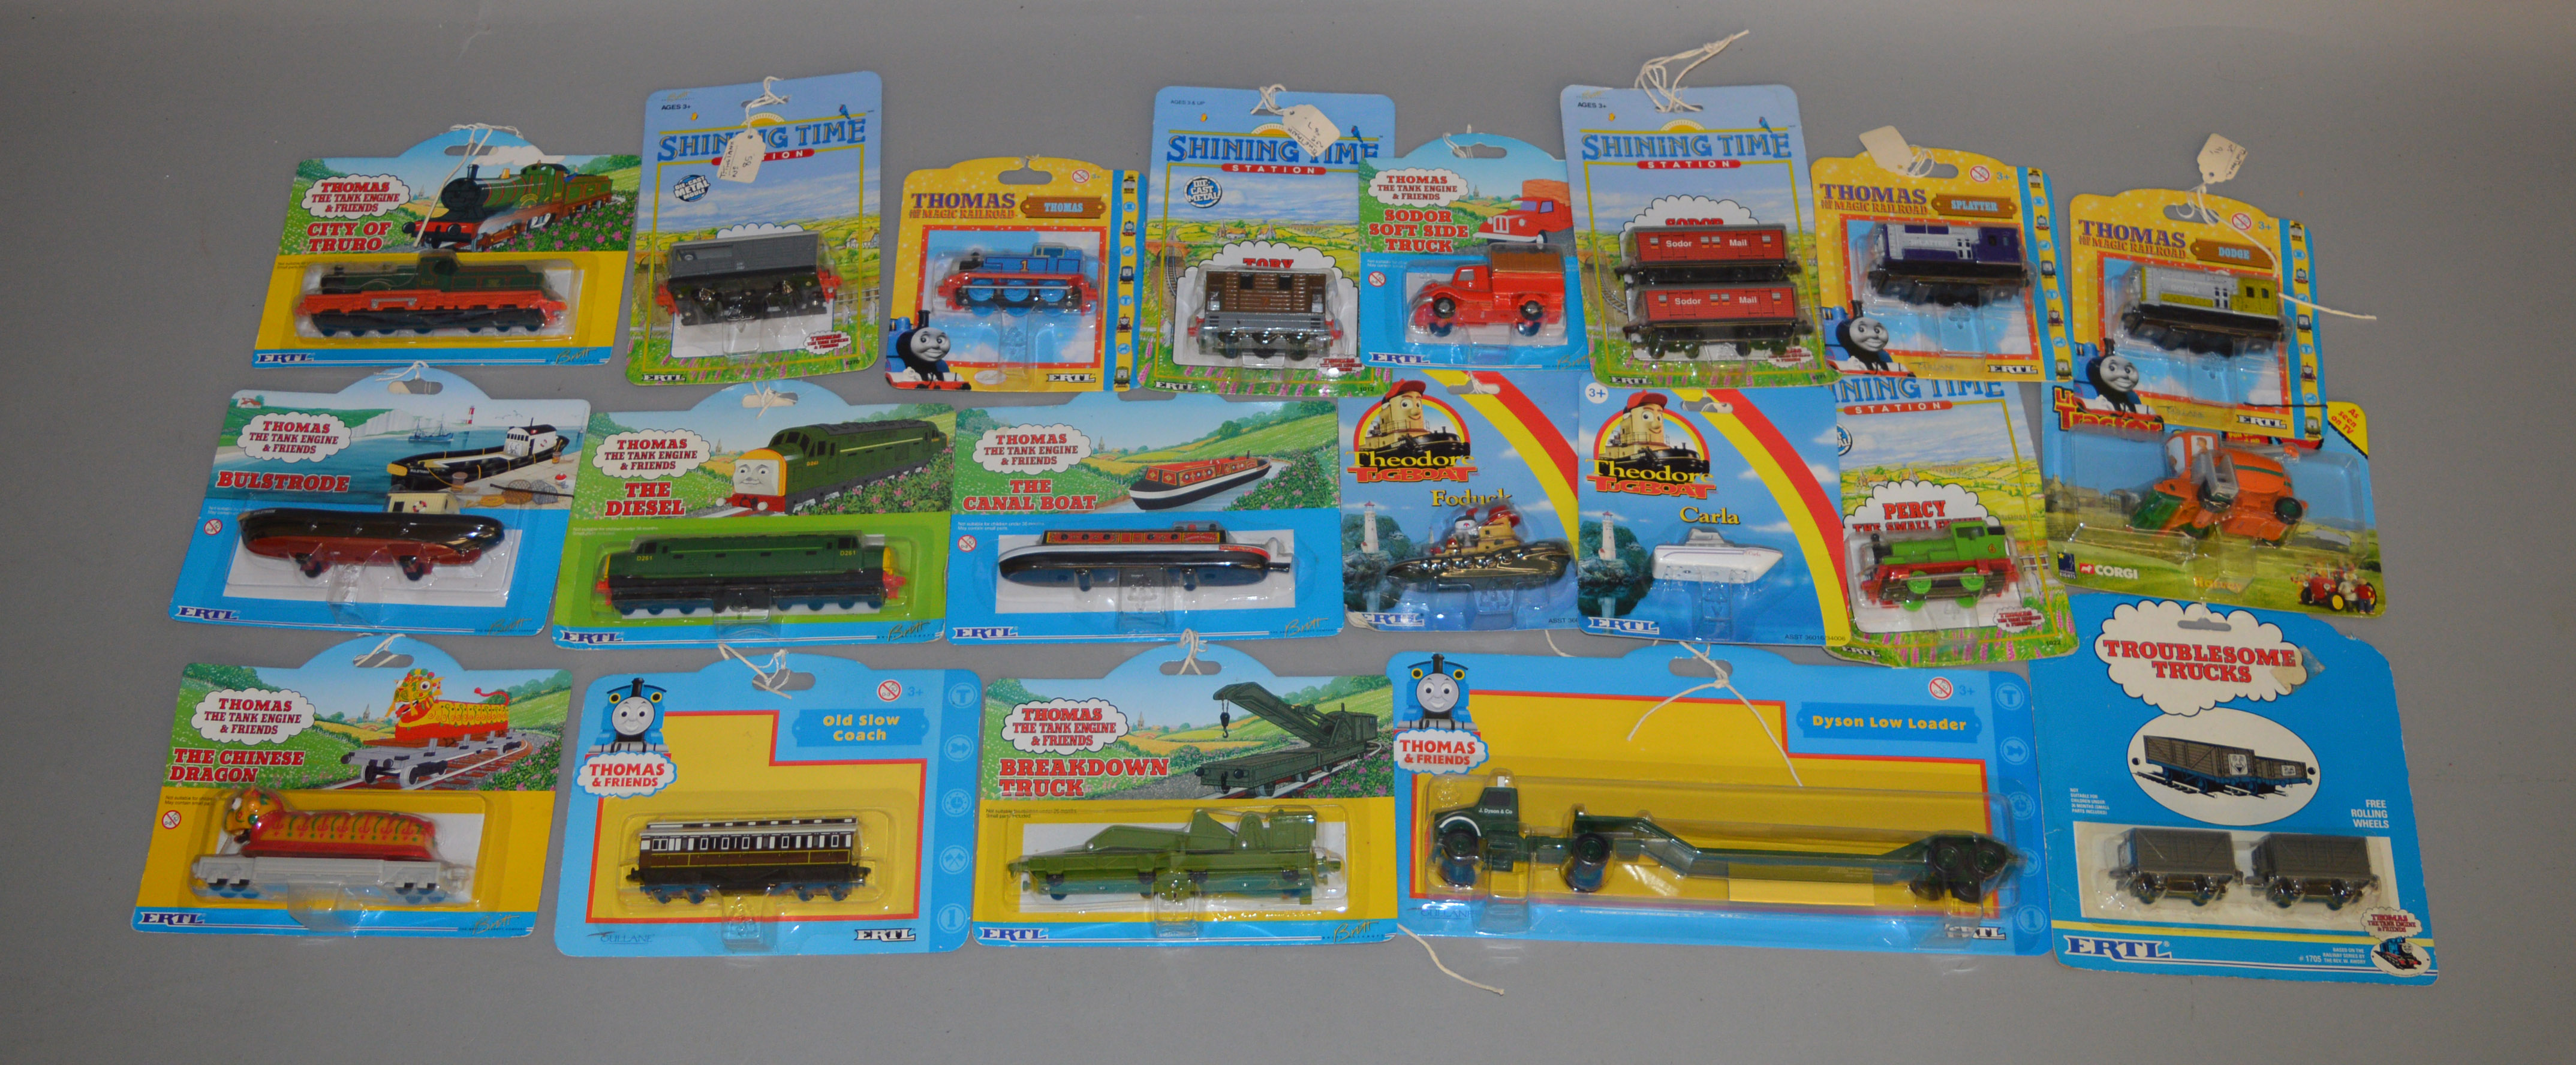 17 Thomas The Tank Engine diecast models by Ertl, also includes The Little Red Tractor and